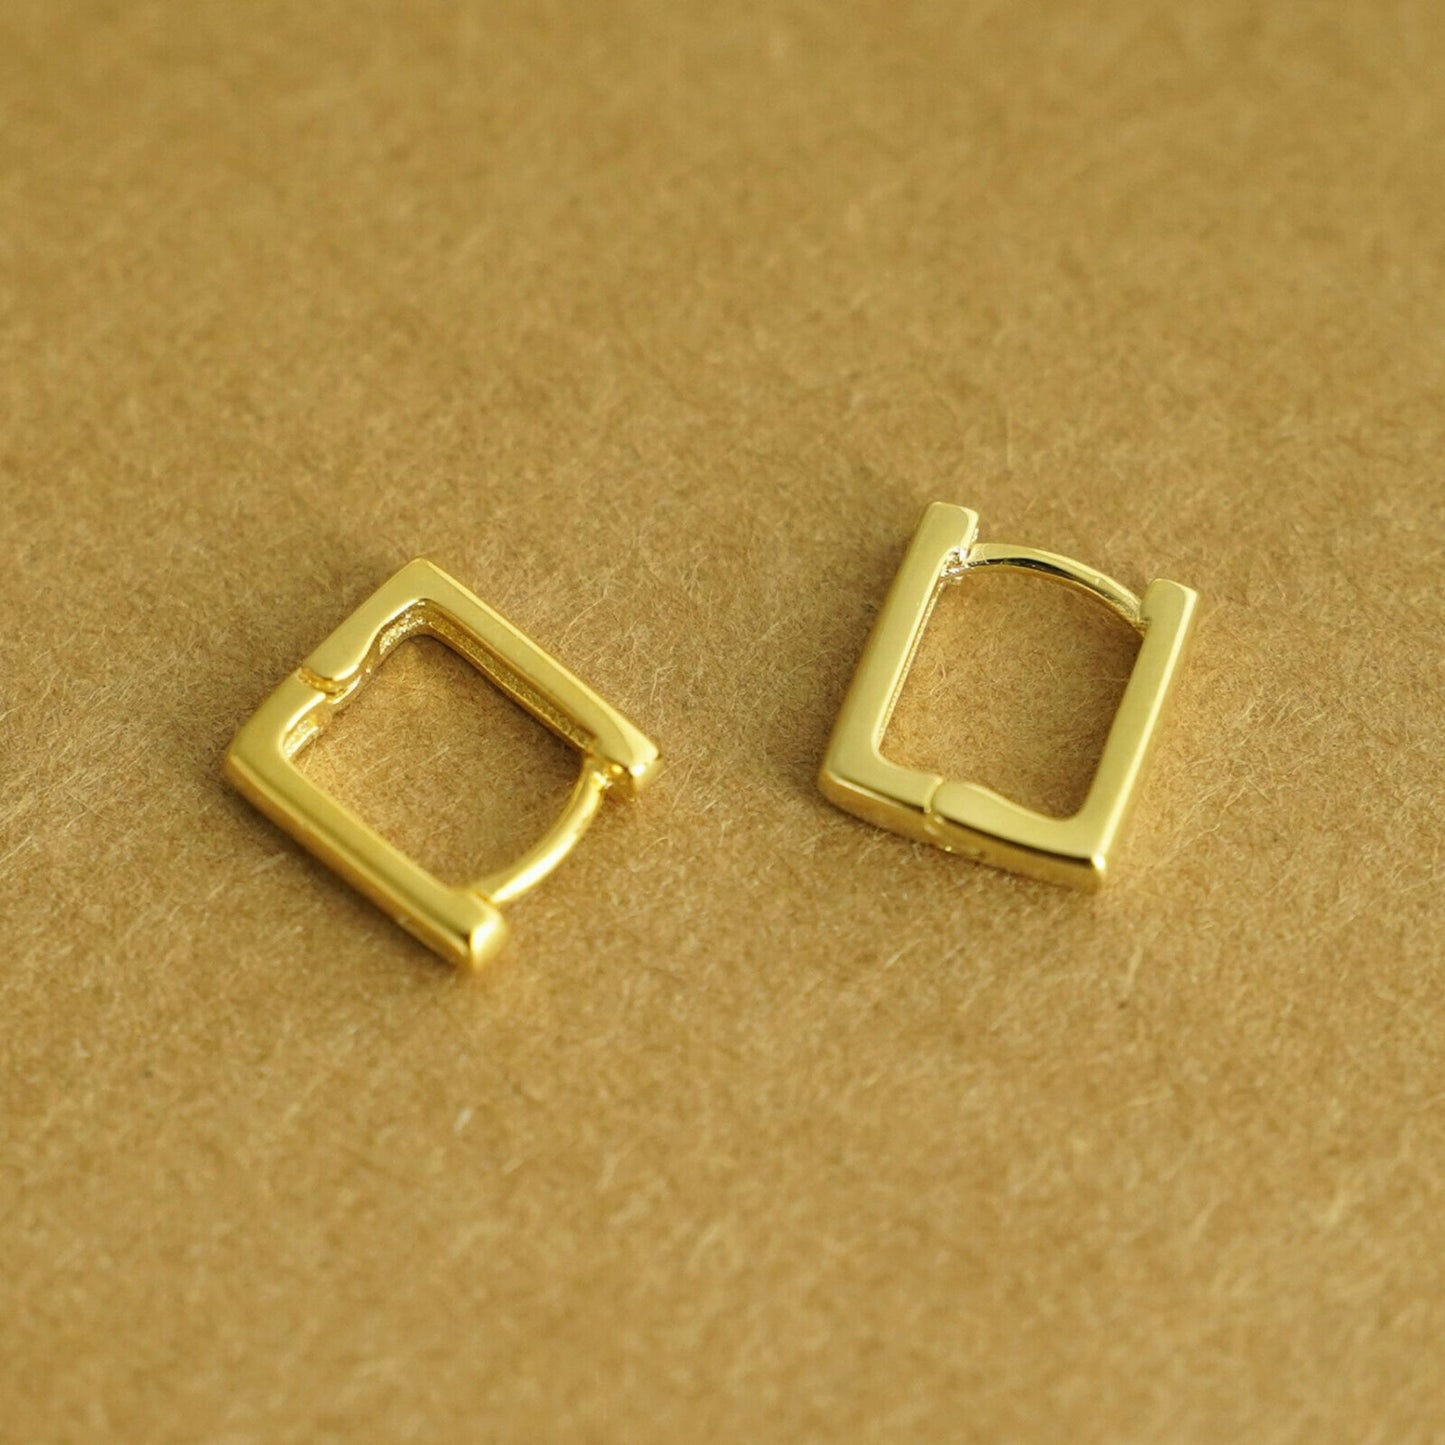 Small Plain Square Hoop Huggie Earrings in 18K Gold Plated Sterling Silver